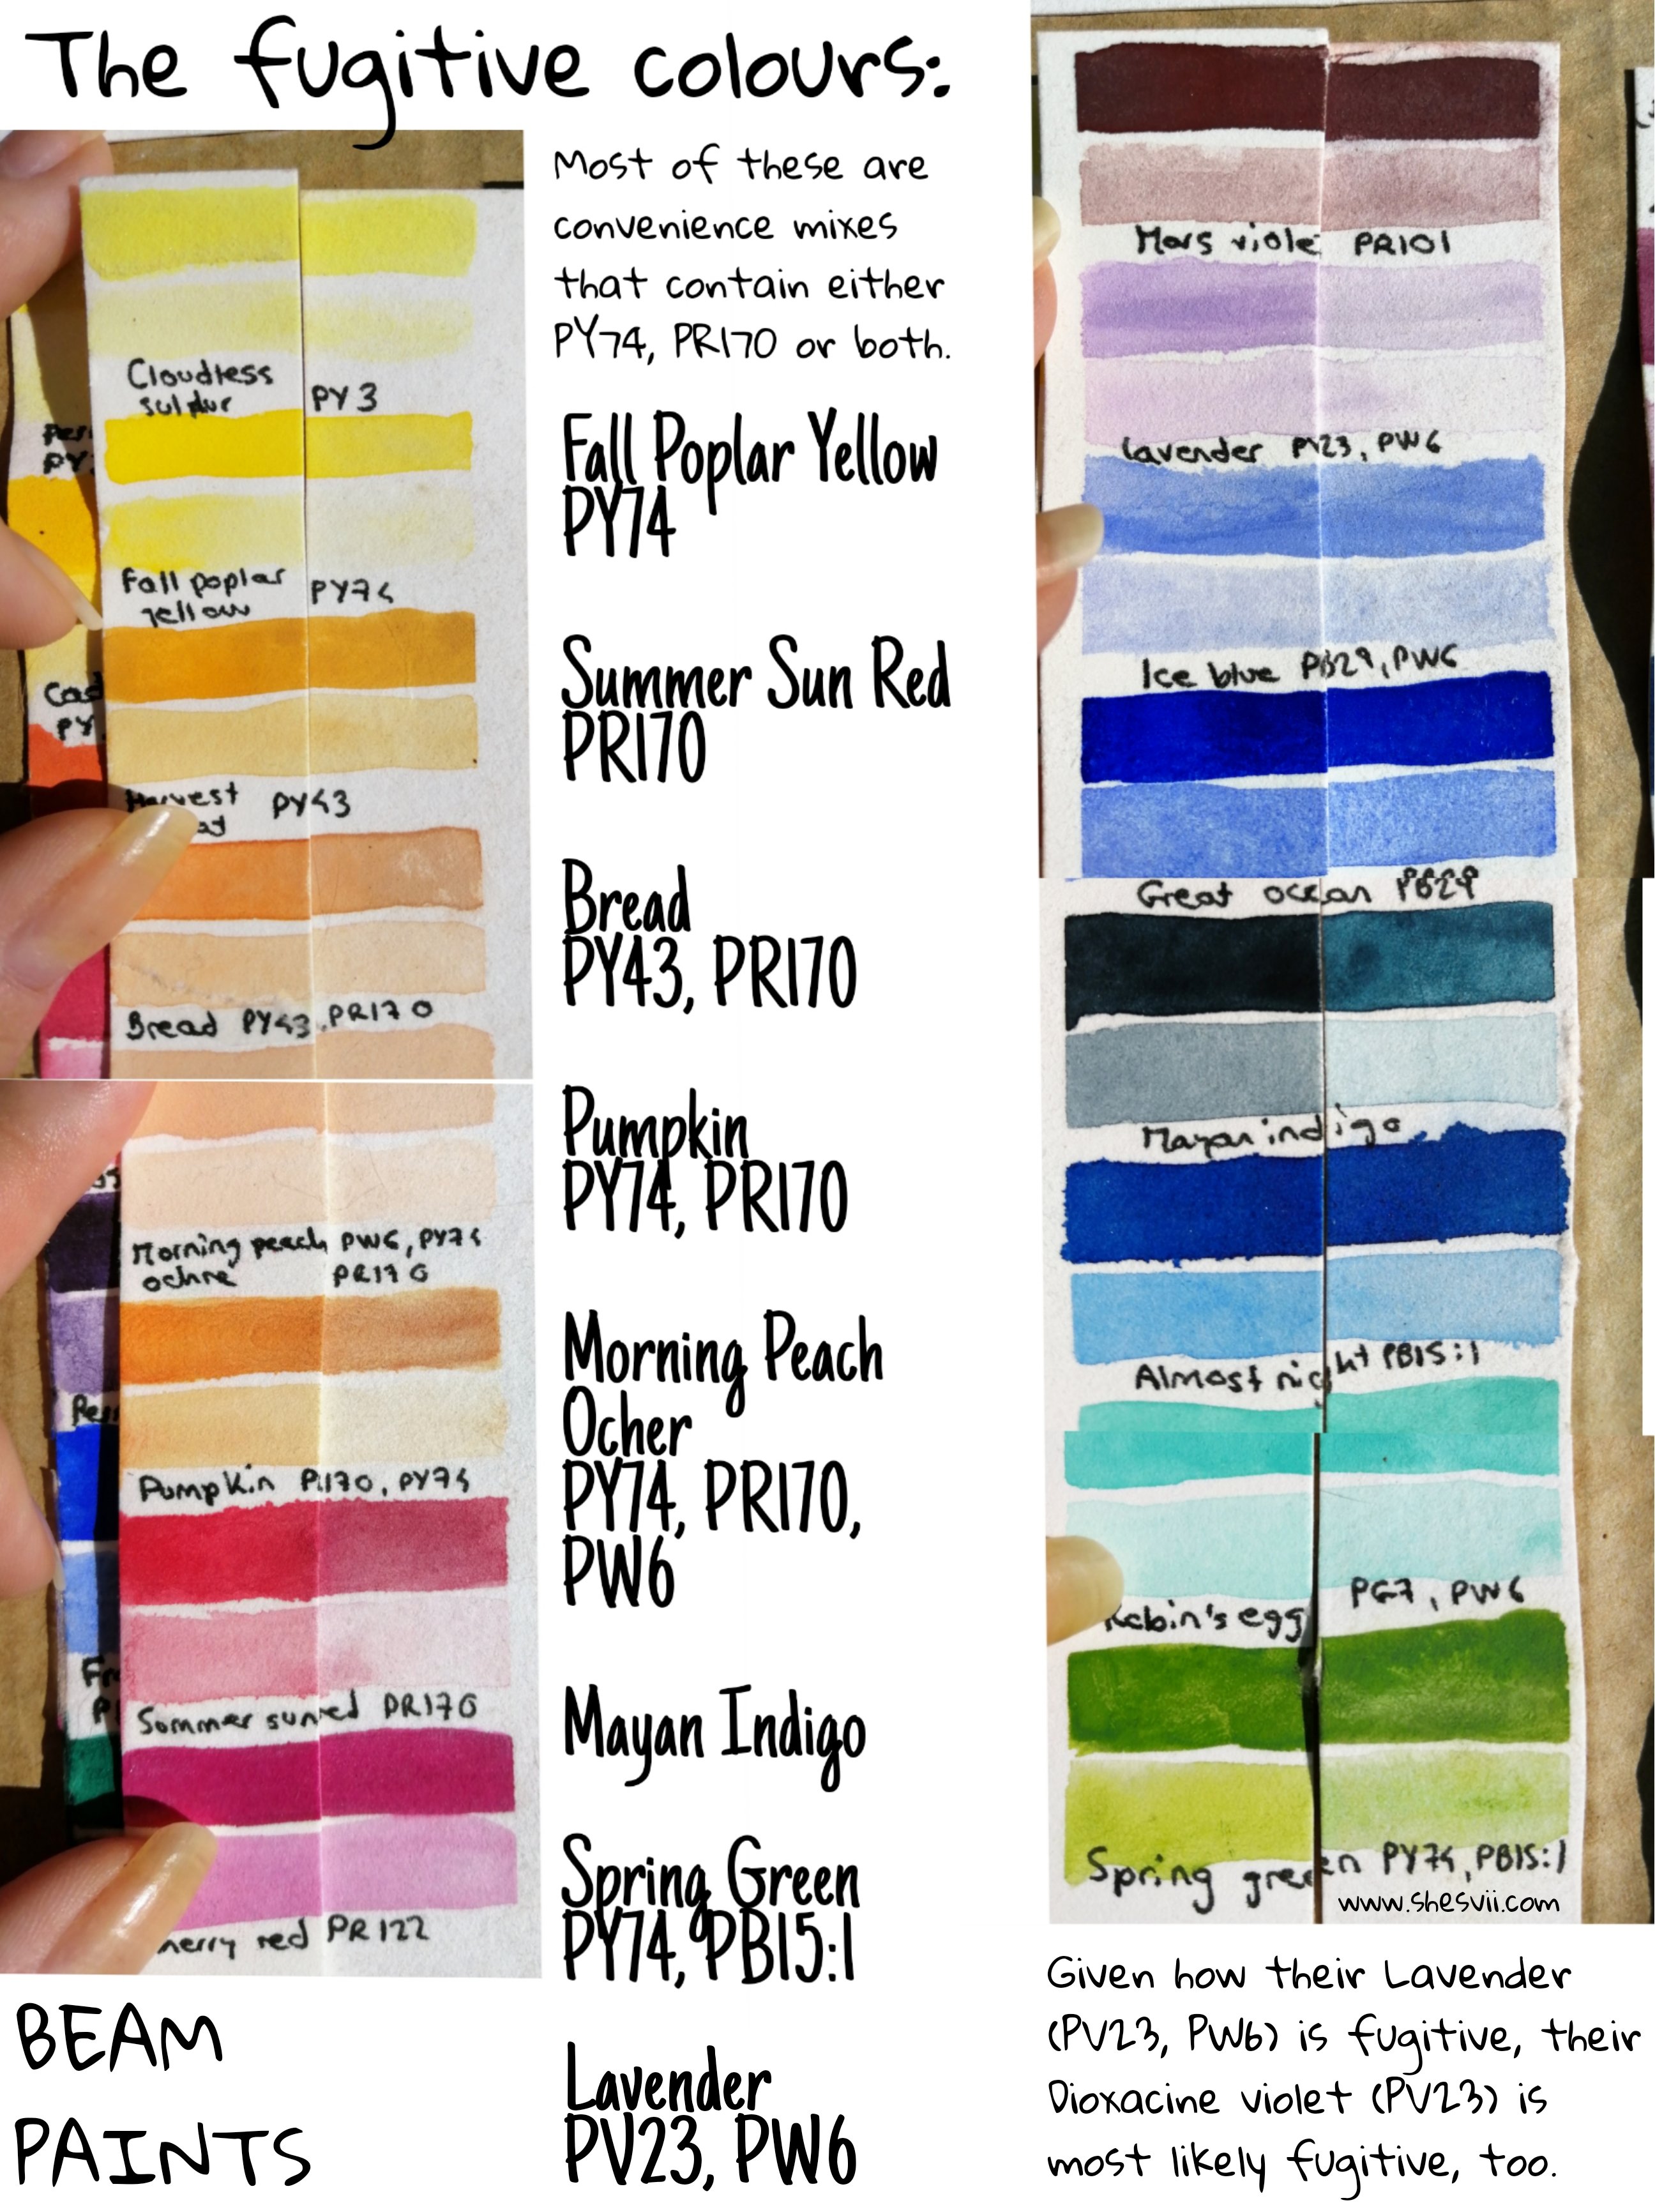 Comparison chart that shows Beam Paints swatches after 3 months of sun exposure next to Beam Paints swatches kept inside a drawer. It contains pigment information and all the fugitive colours 